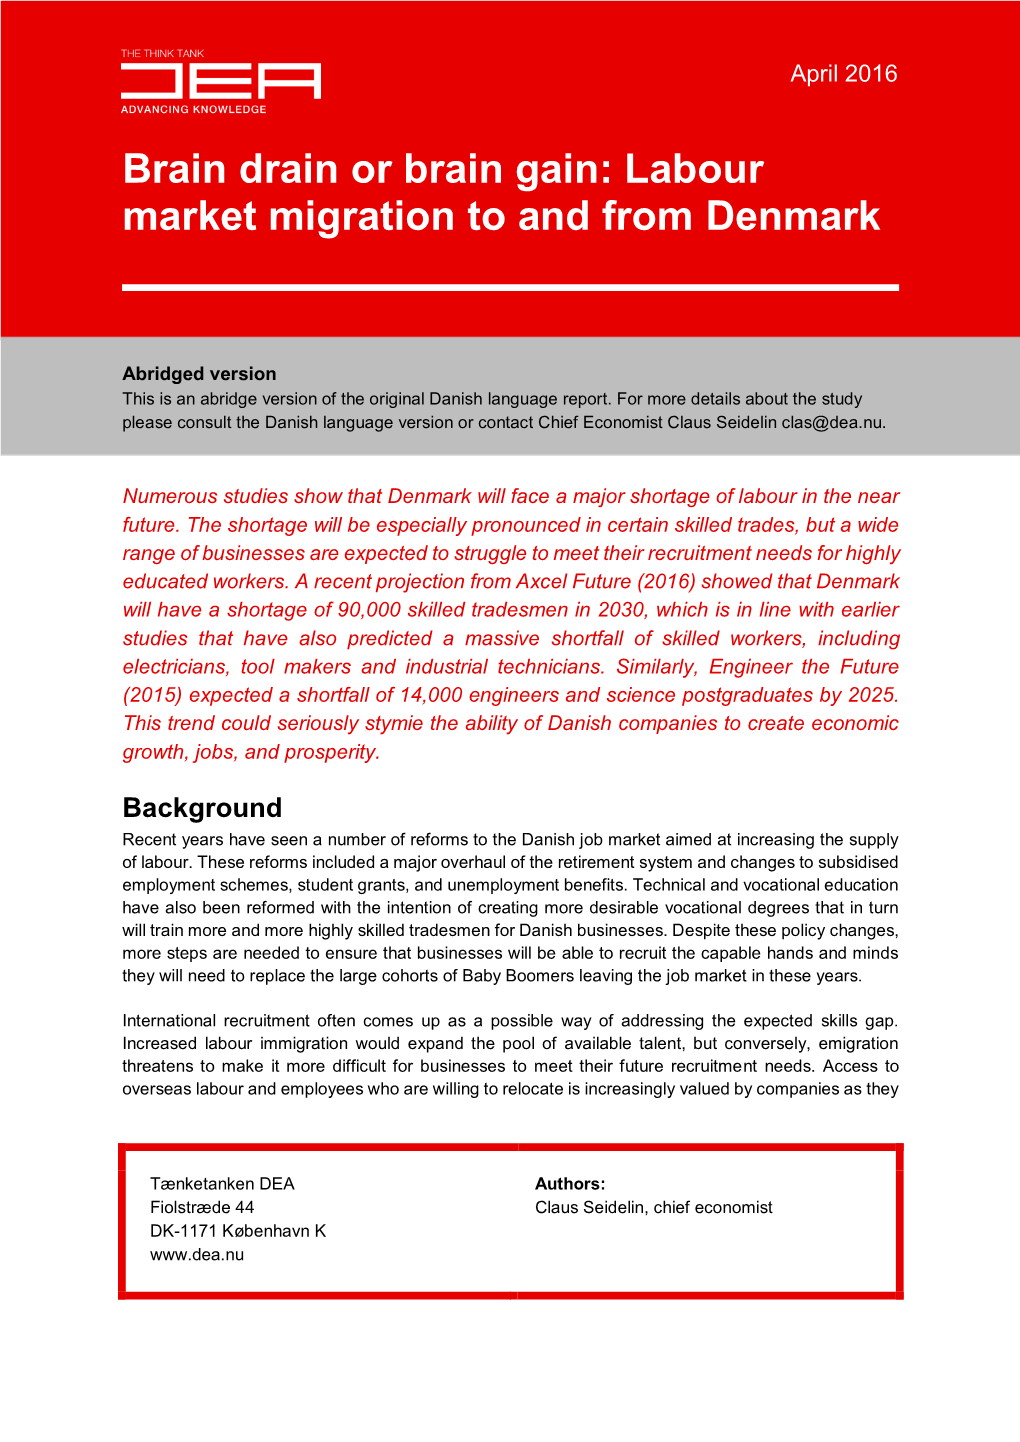 Brain Drain Or Brain Gain: Labour Market Migration to and from Denmark